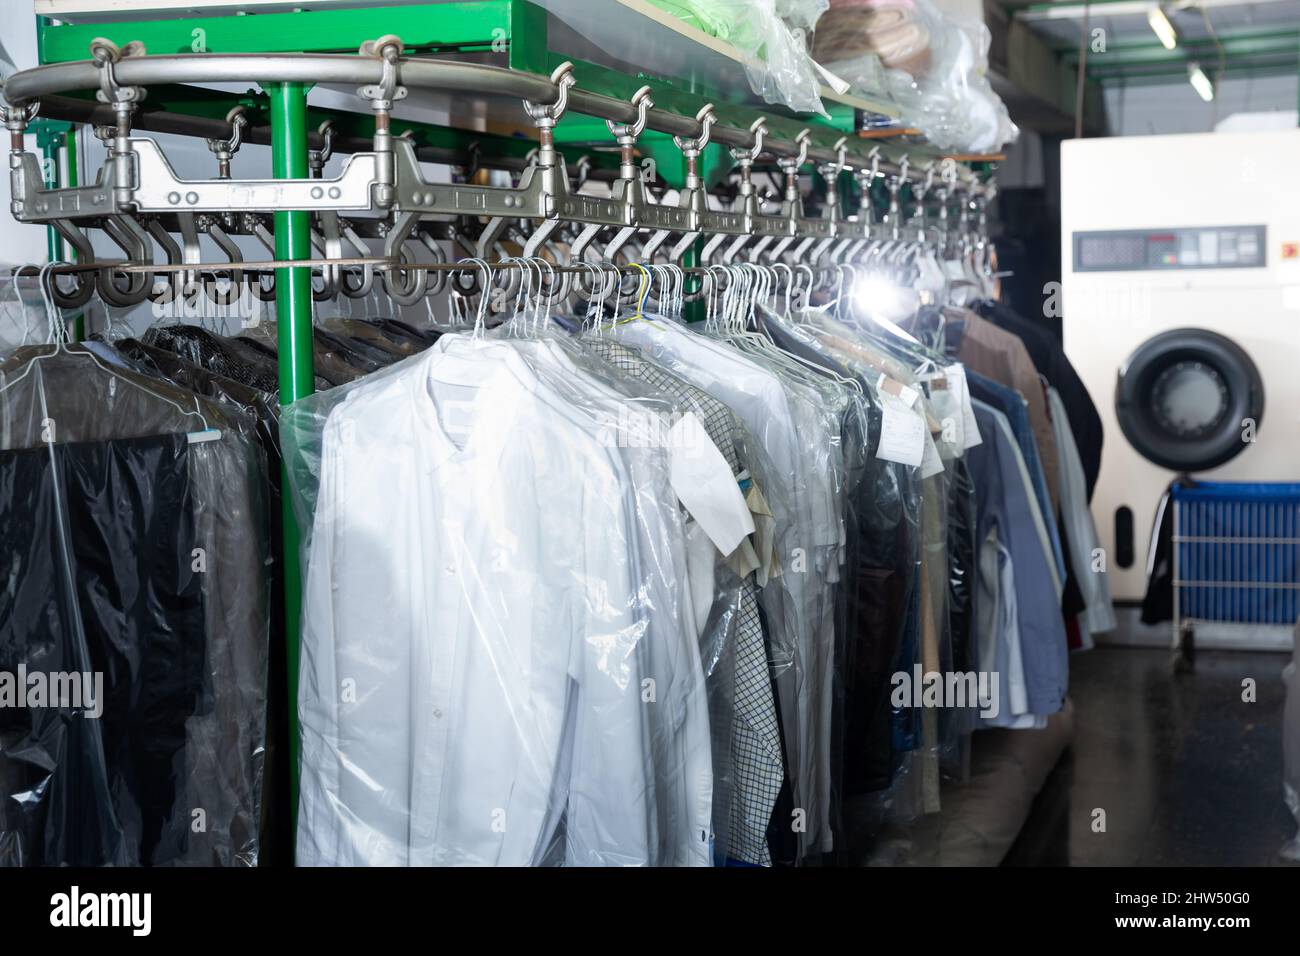 https://c8.alamy.com/comp/2HW50G0/clothes-in-plastic-bags-hanging-at-dry-cleaning-2HW50G0.jpg